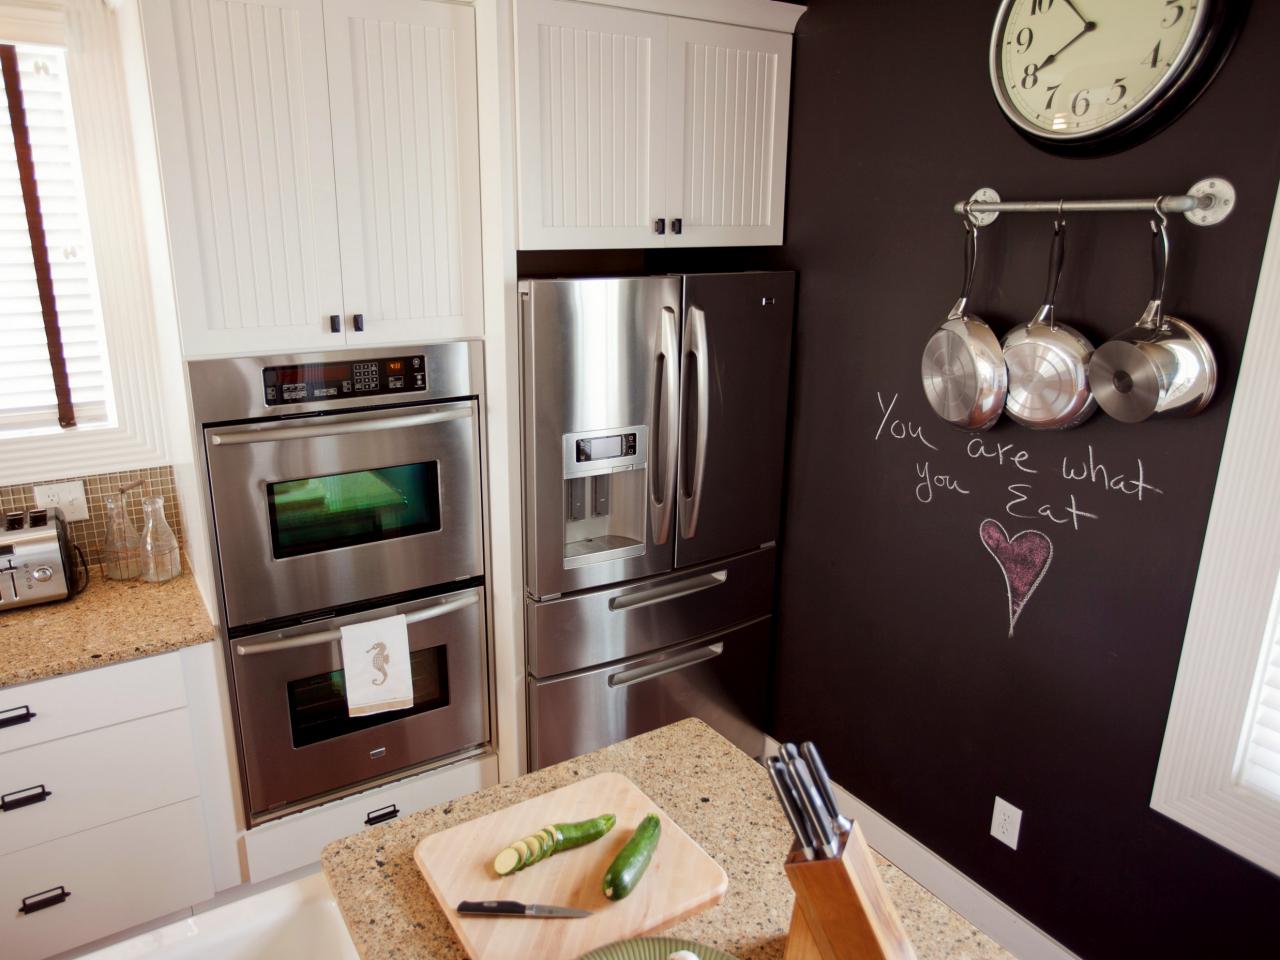 How To Paint A Kitchen Chalkboard Wall Chalk Wall In Kitchen